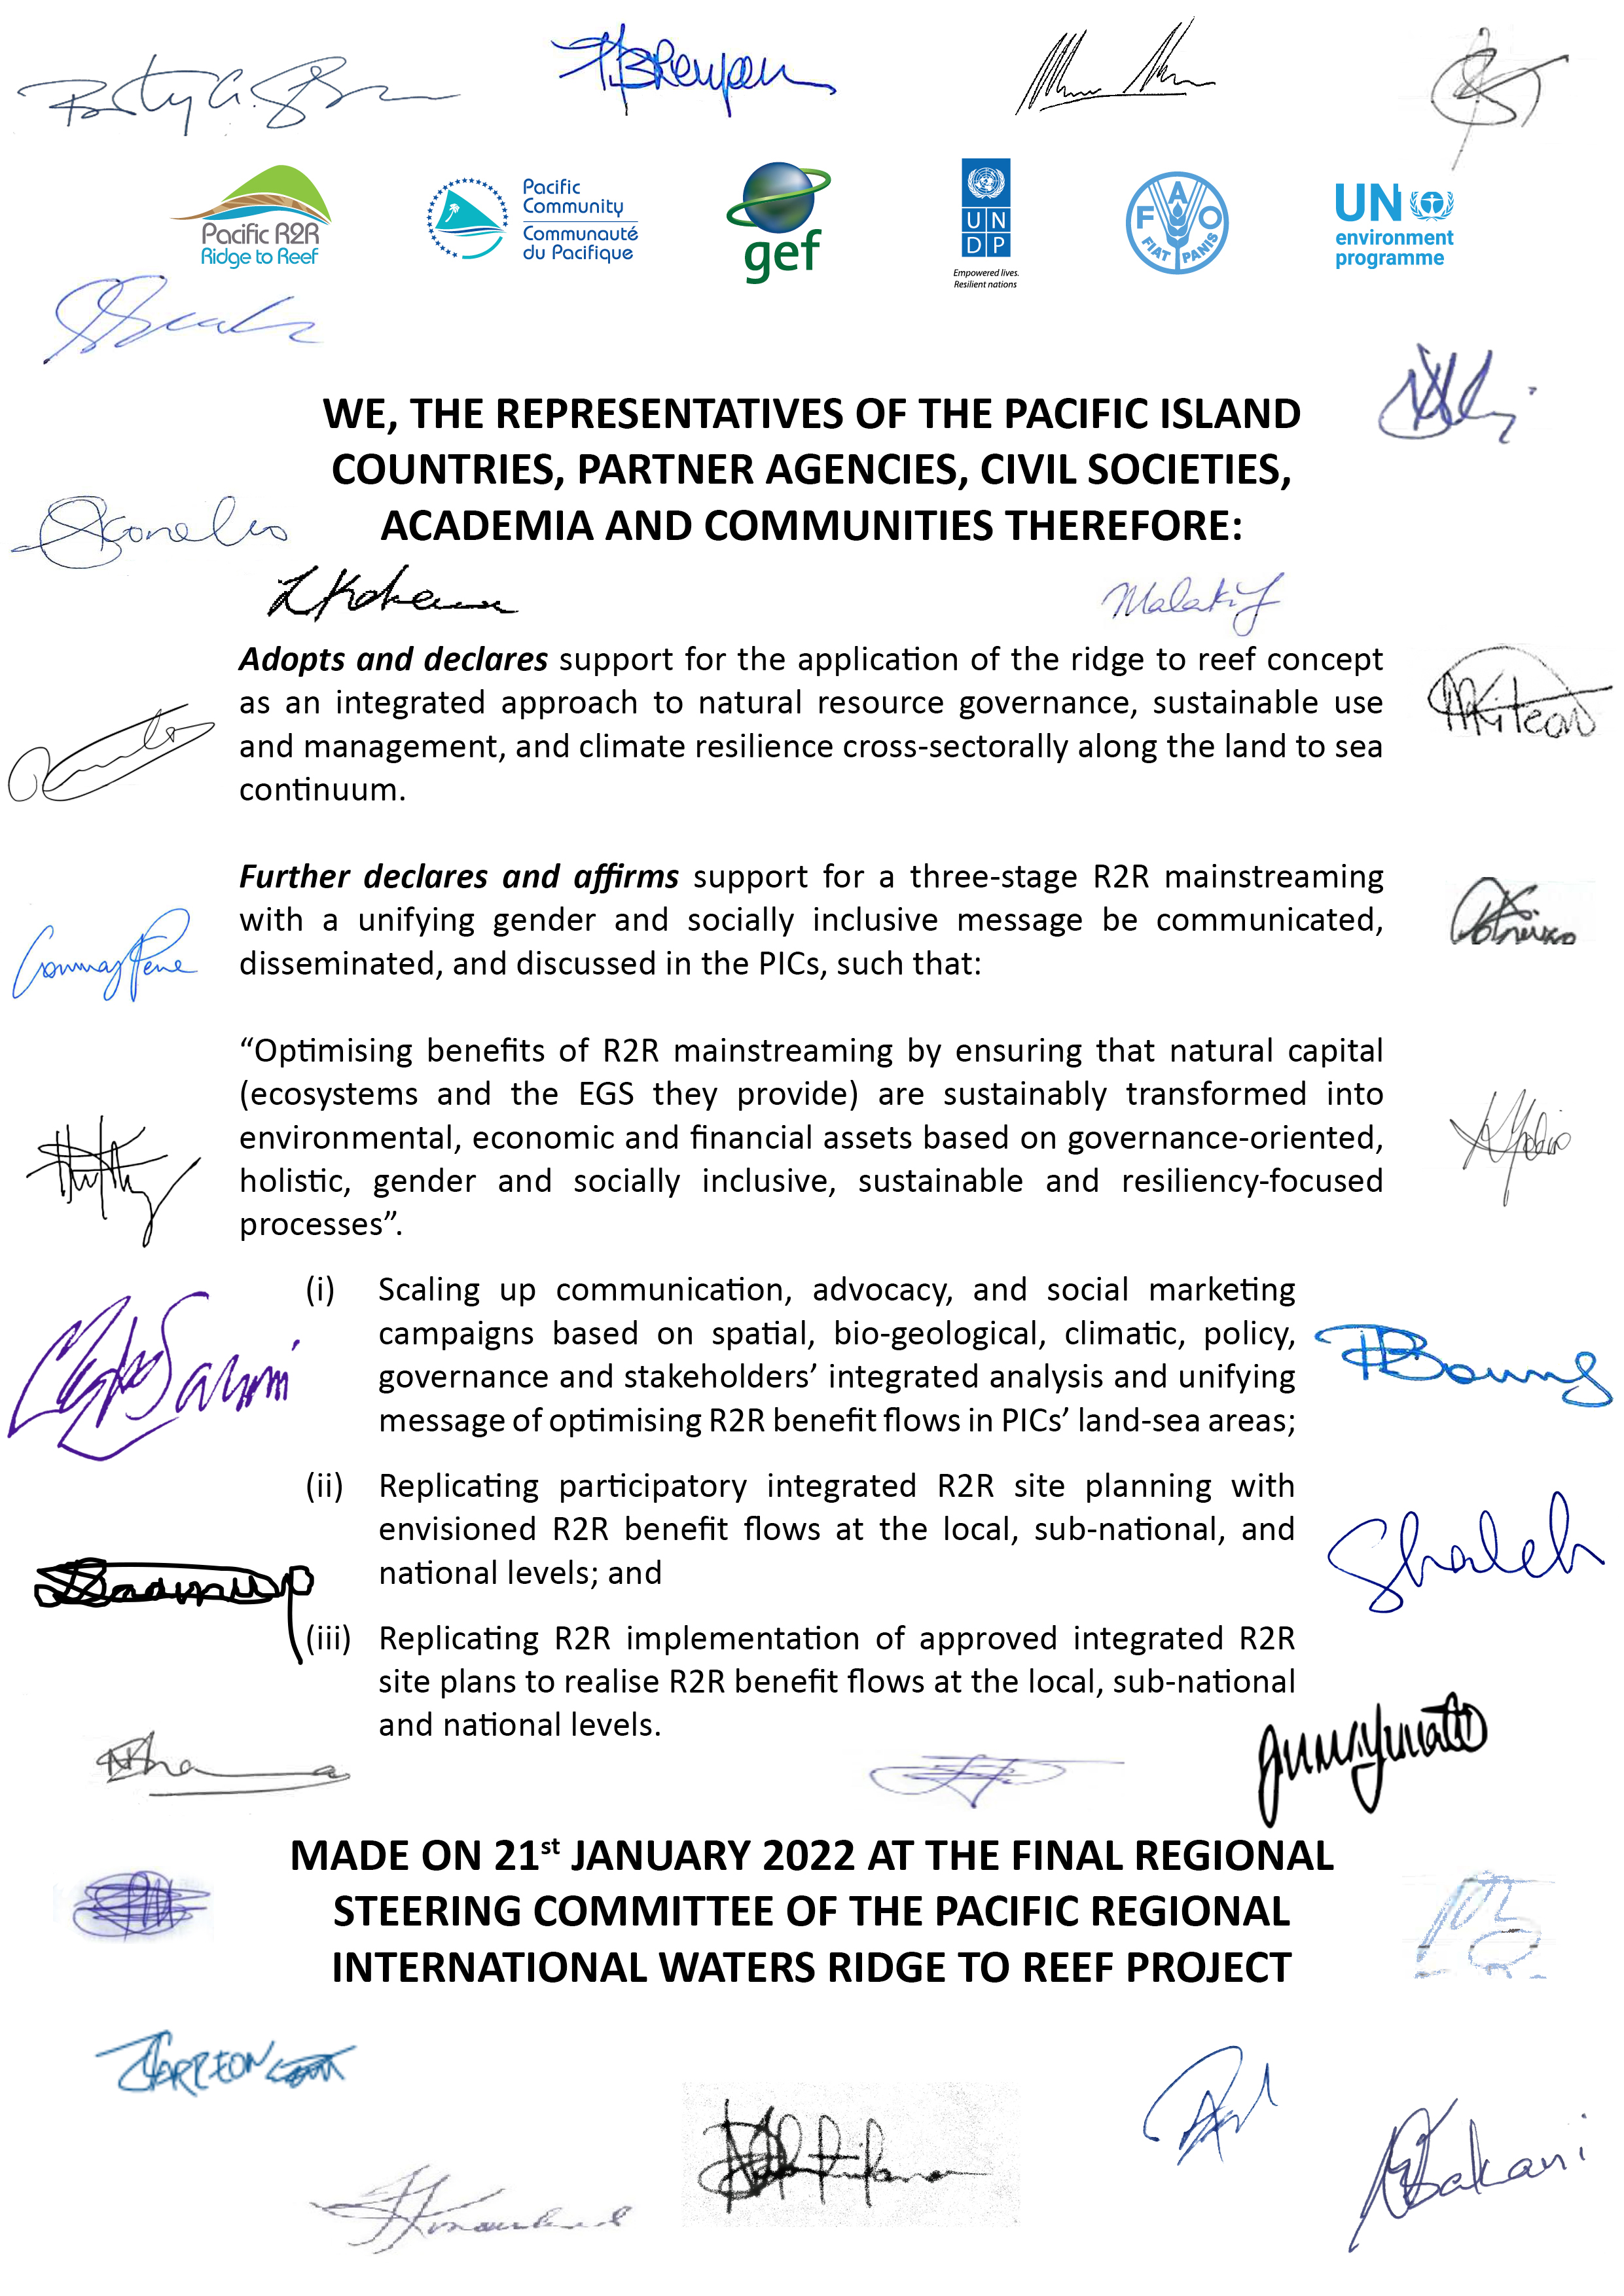 Declaration for R2R mainstreaming for sustainable development in tropical islands setting